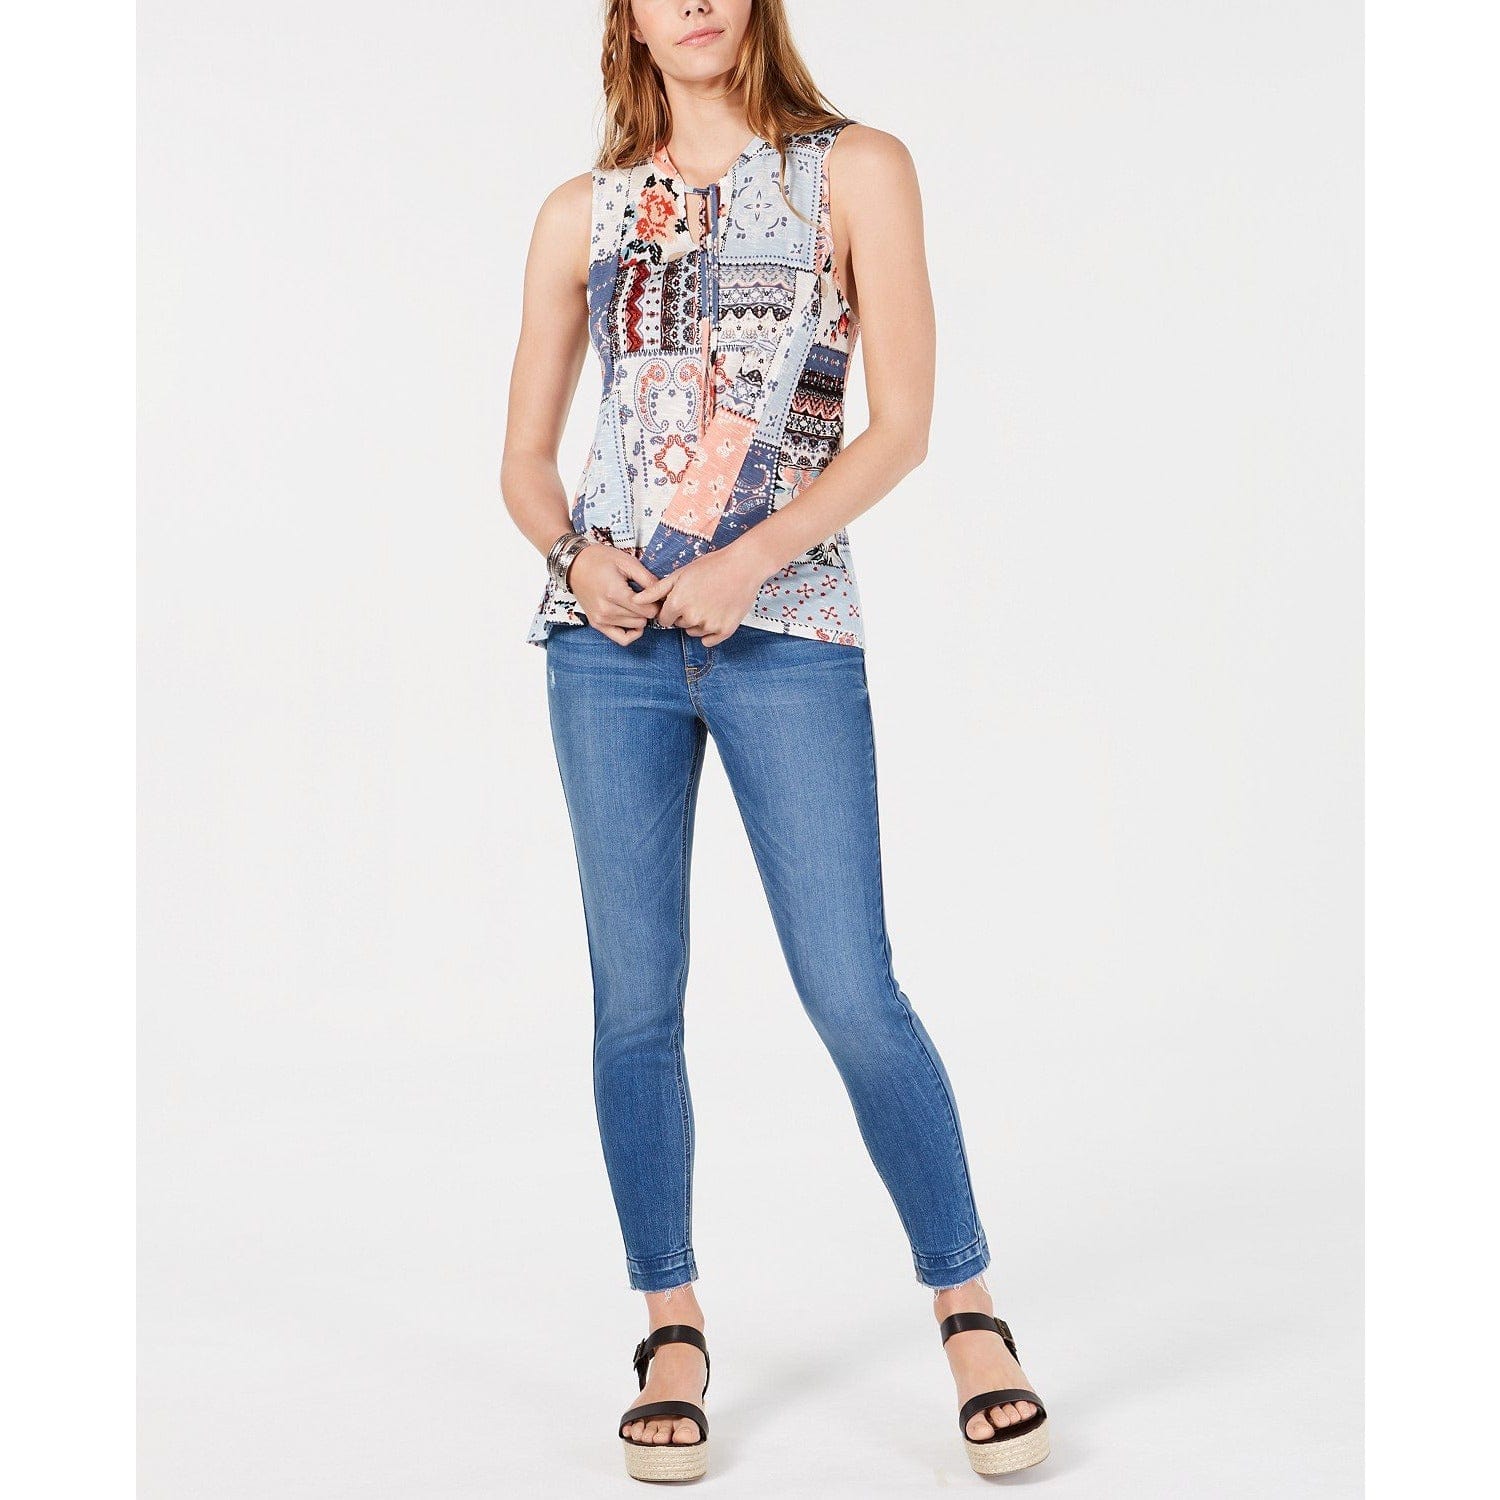 American Rag Juniors' Printed Tassel-Tie Tank Top Egret - The Pink Pigs, A Compassionate Boutique